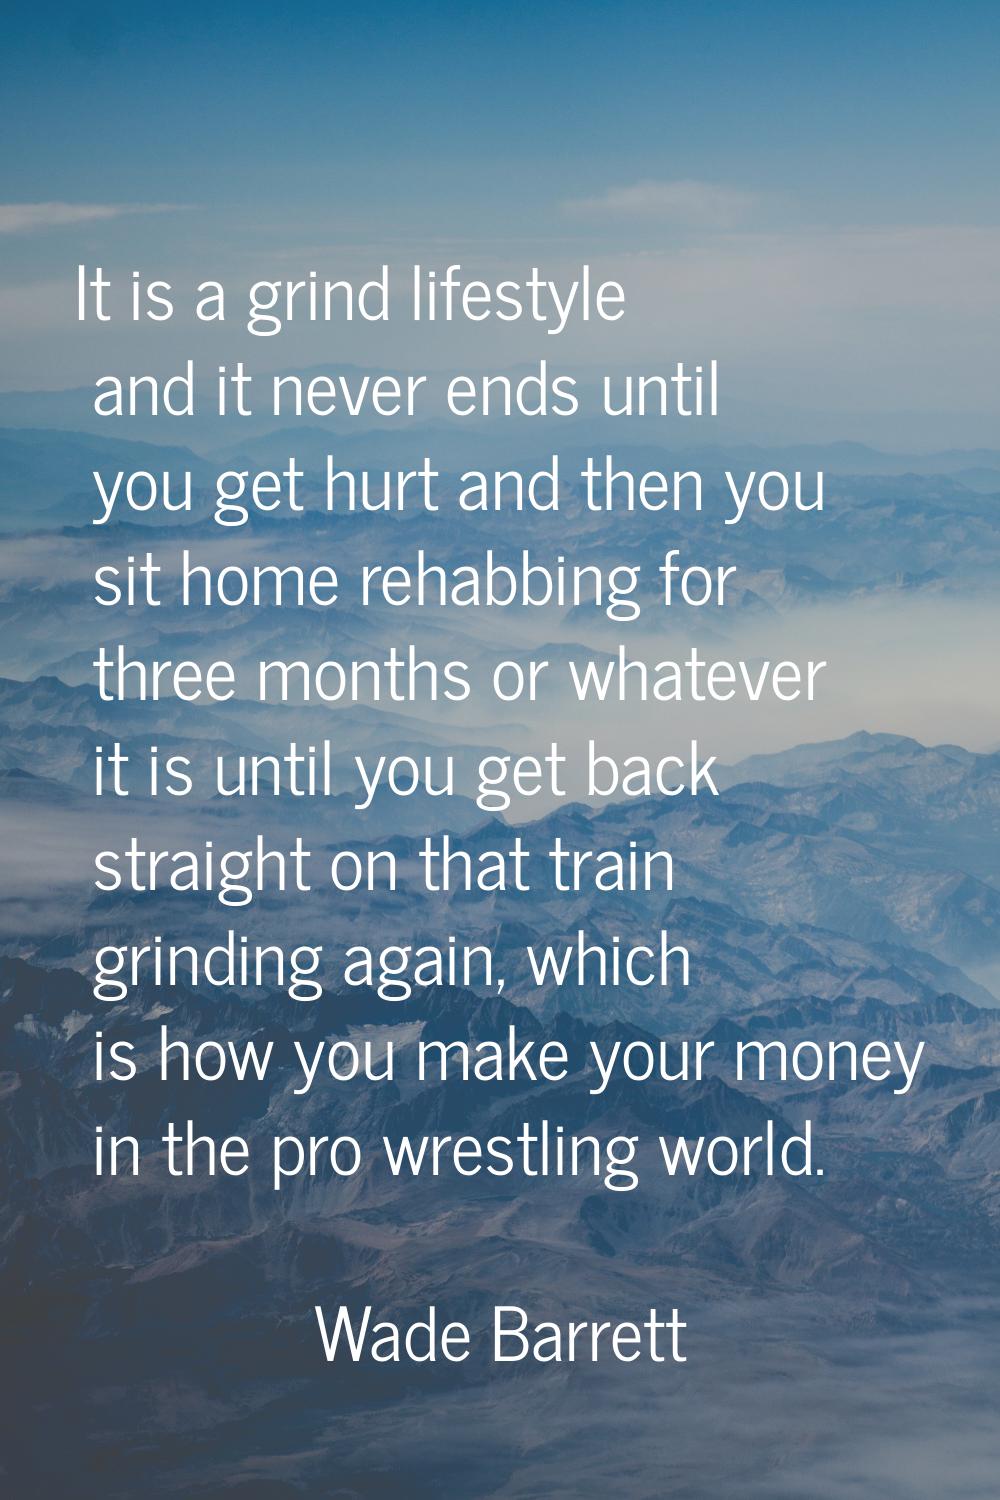 It is a grind lifestyle and it never ends until you get hurt and then you sit home rehabbing for th